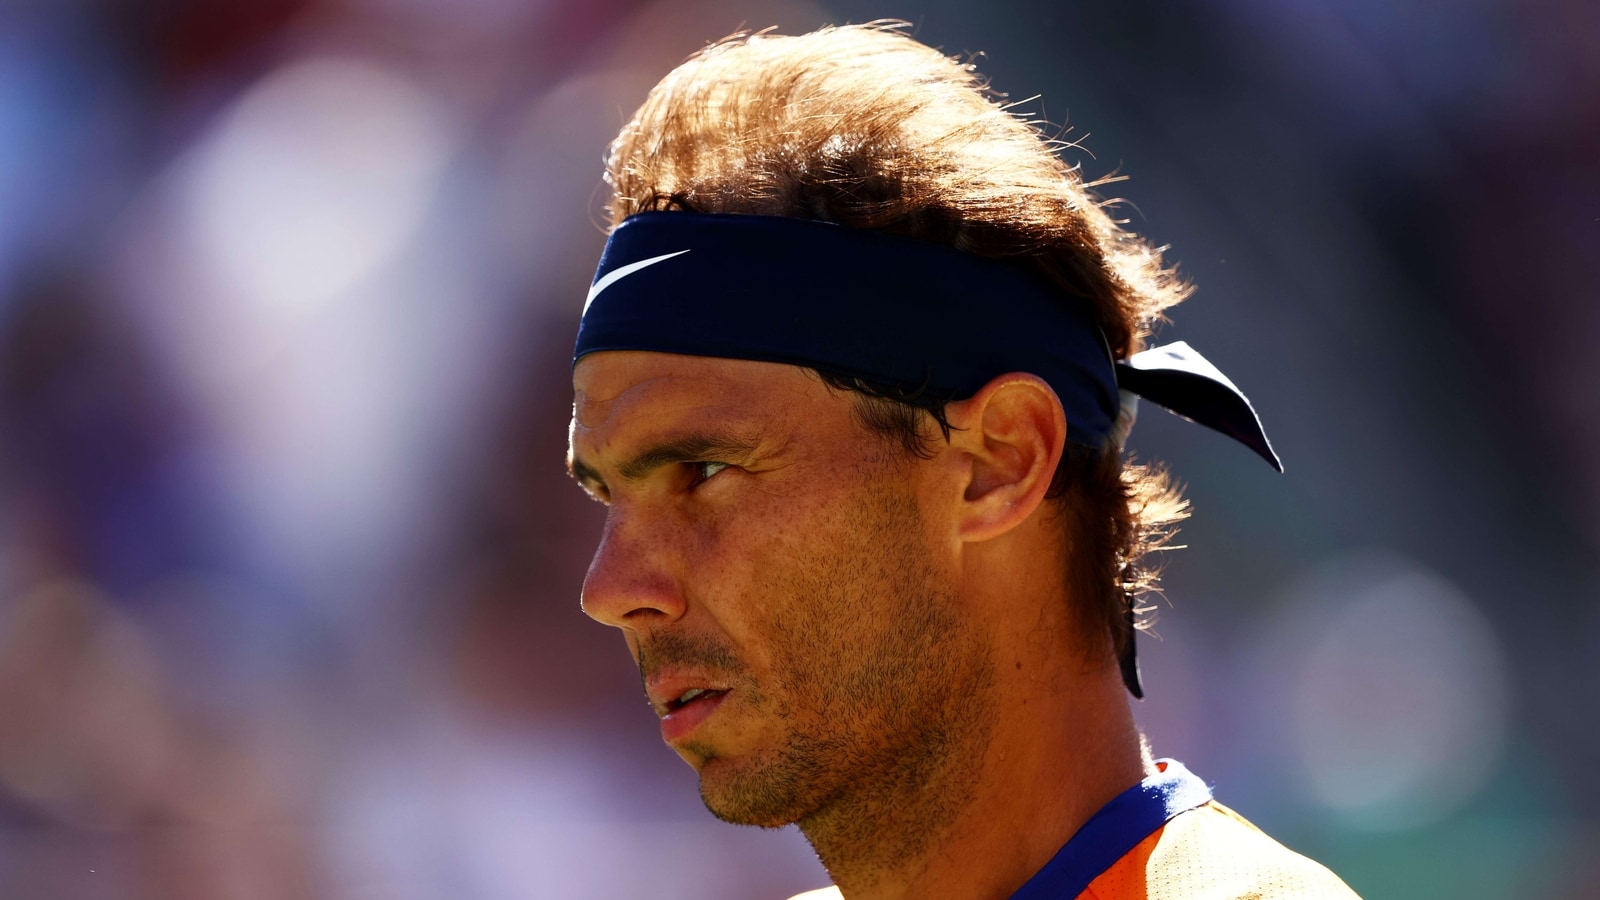 Rafael Nadal out injured at least 1 month in lead-up to French Open